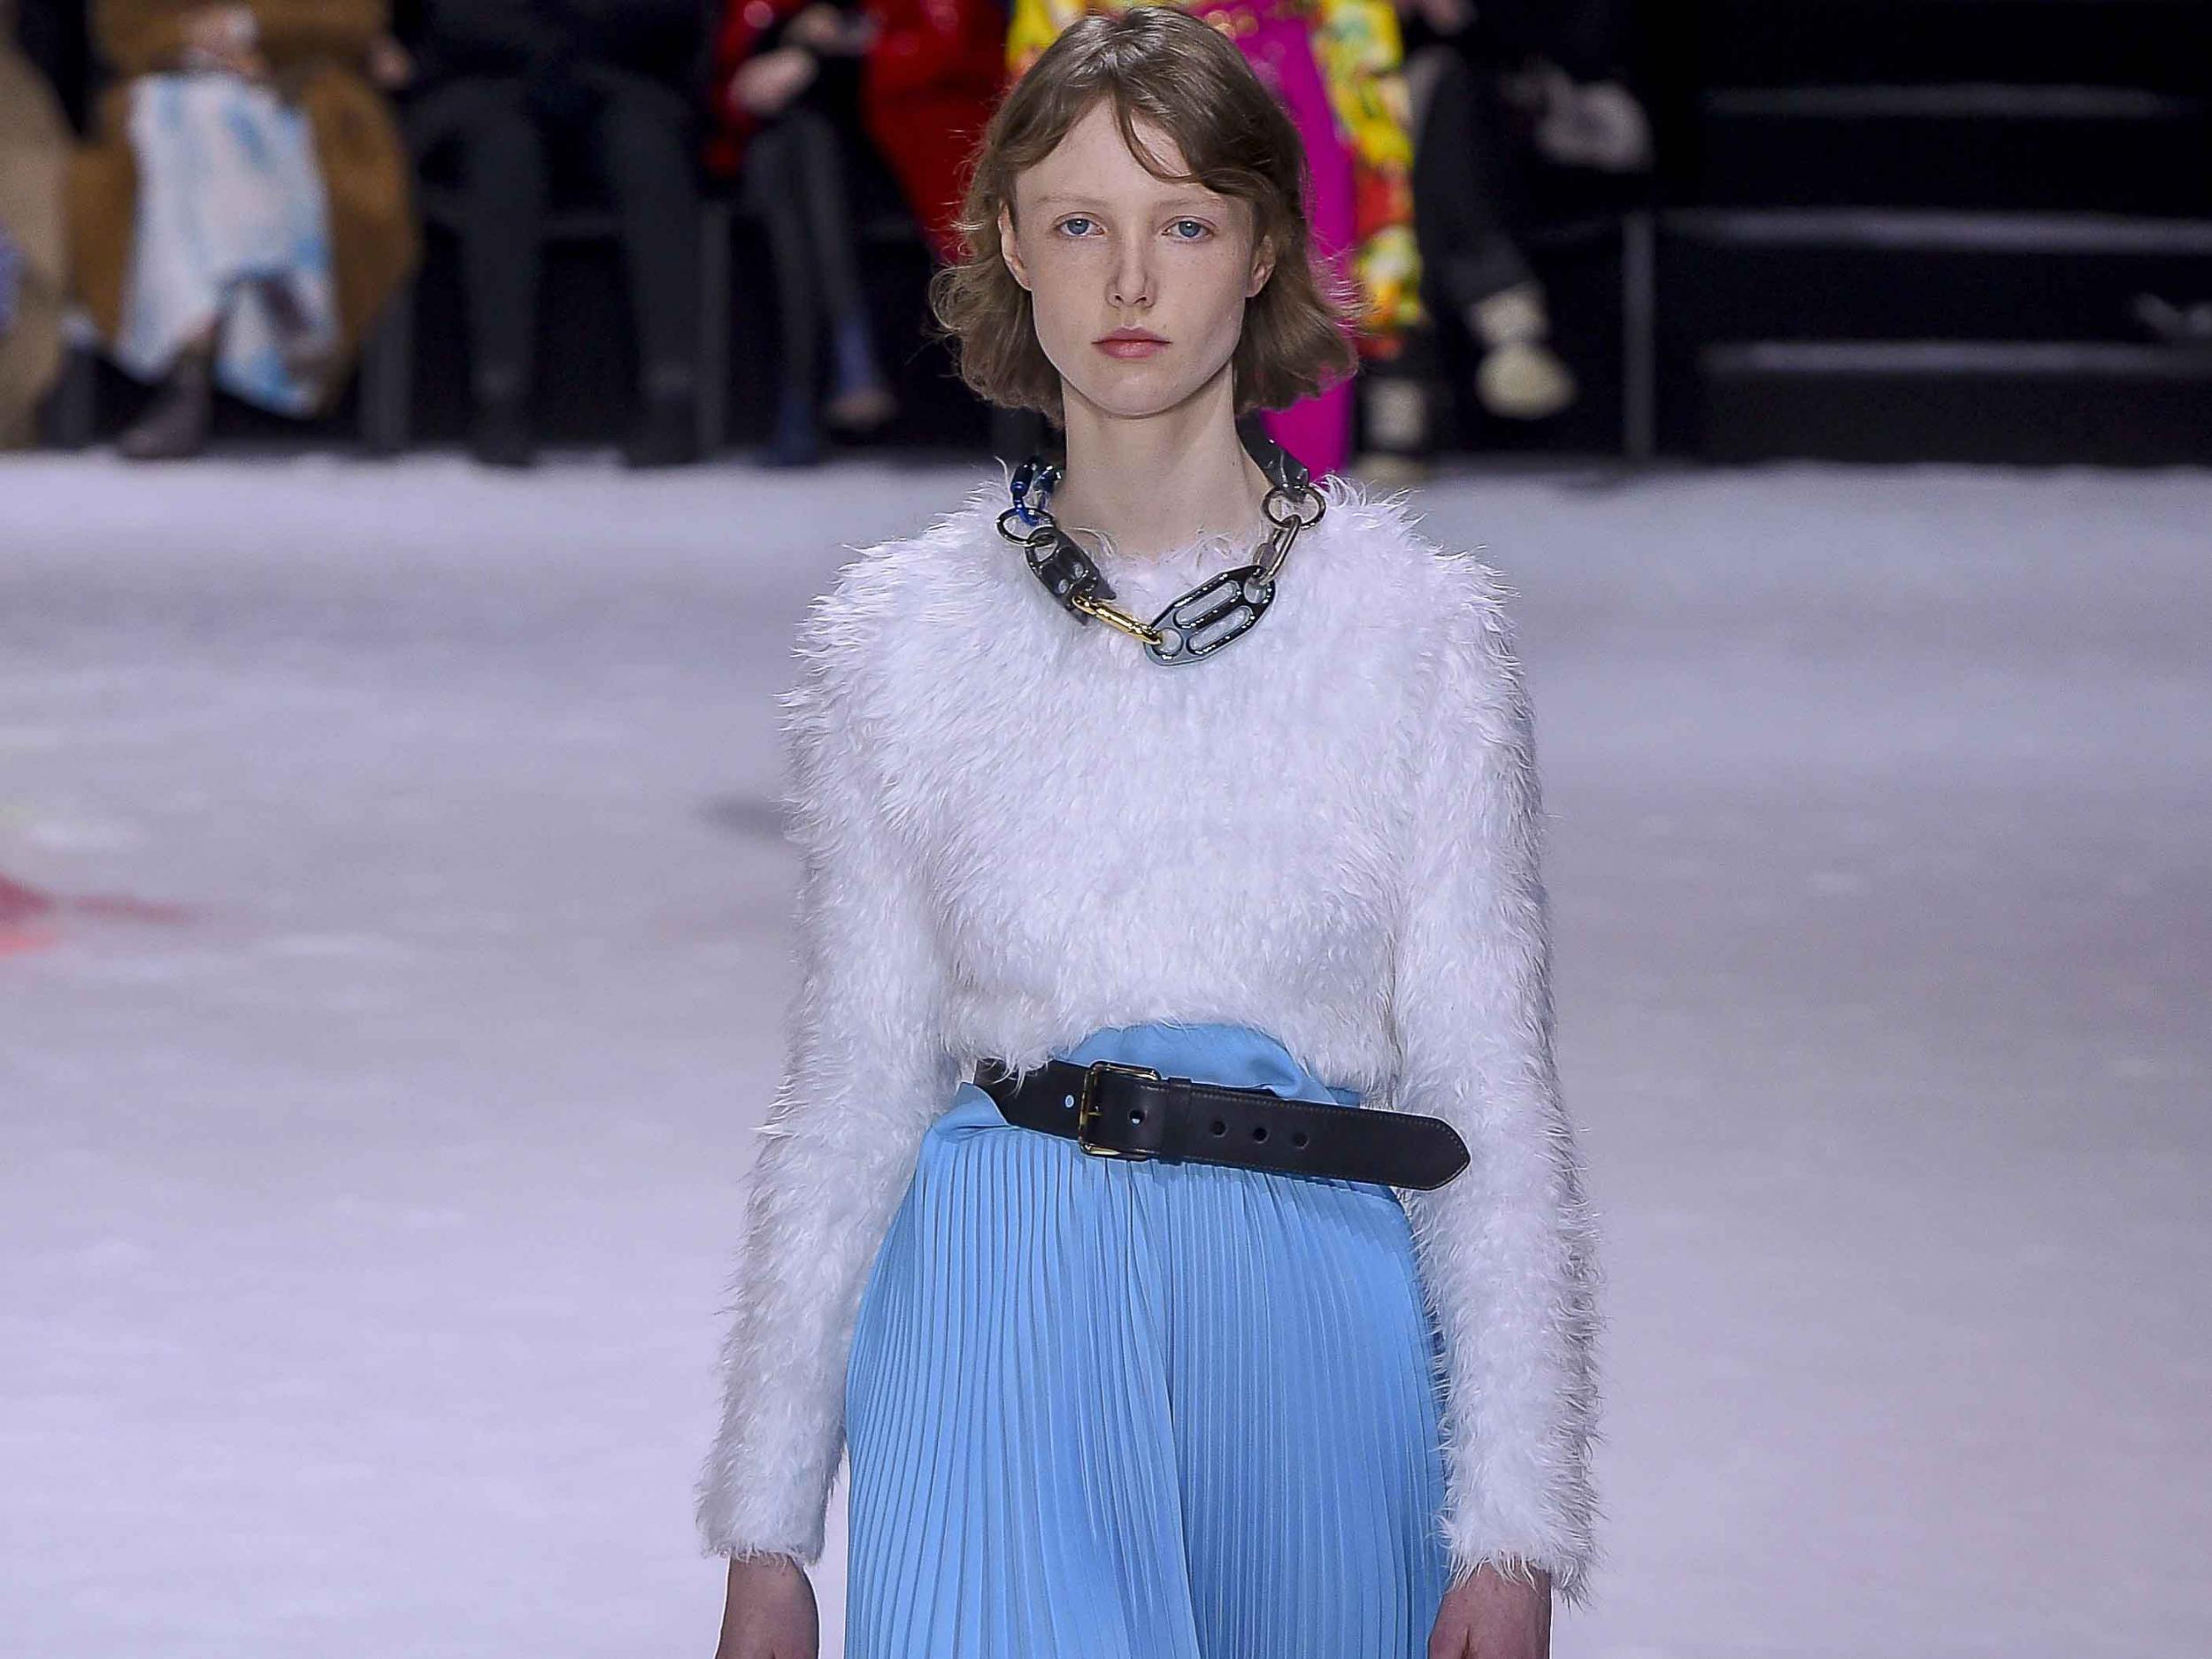 Balenciaga paired pleated skirts with fluffy jumpers for autumn/winter 2018